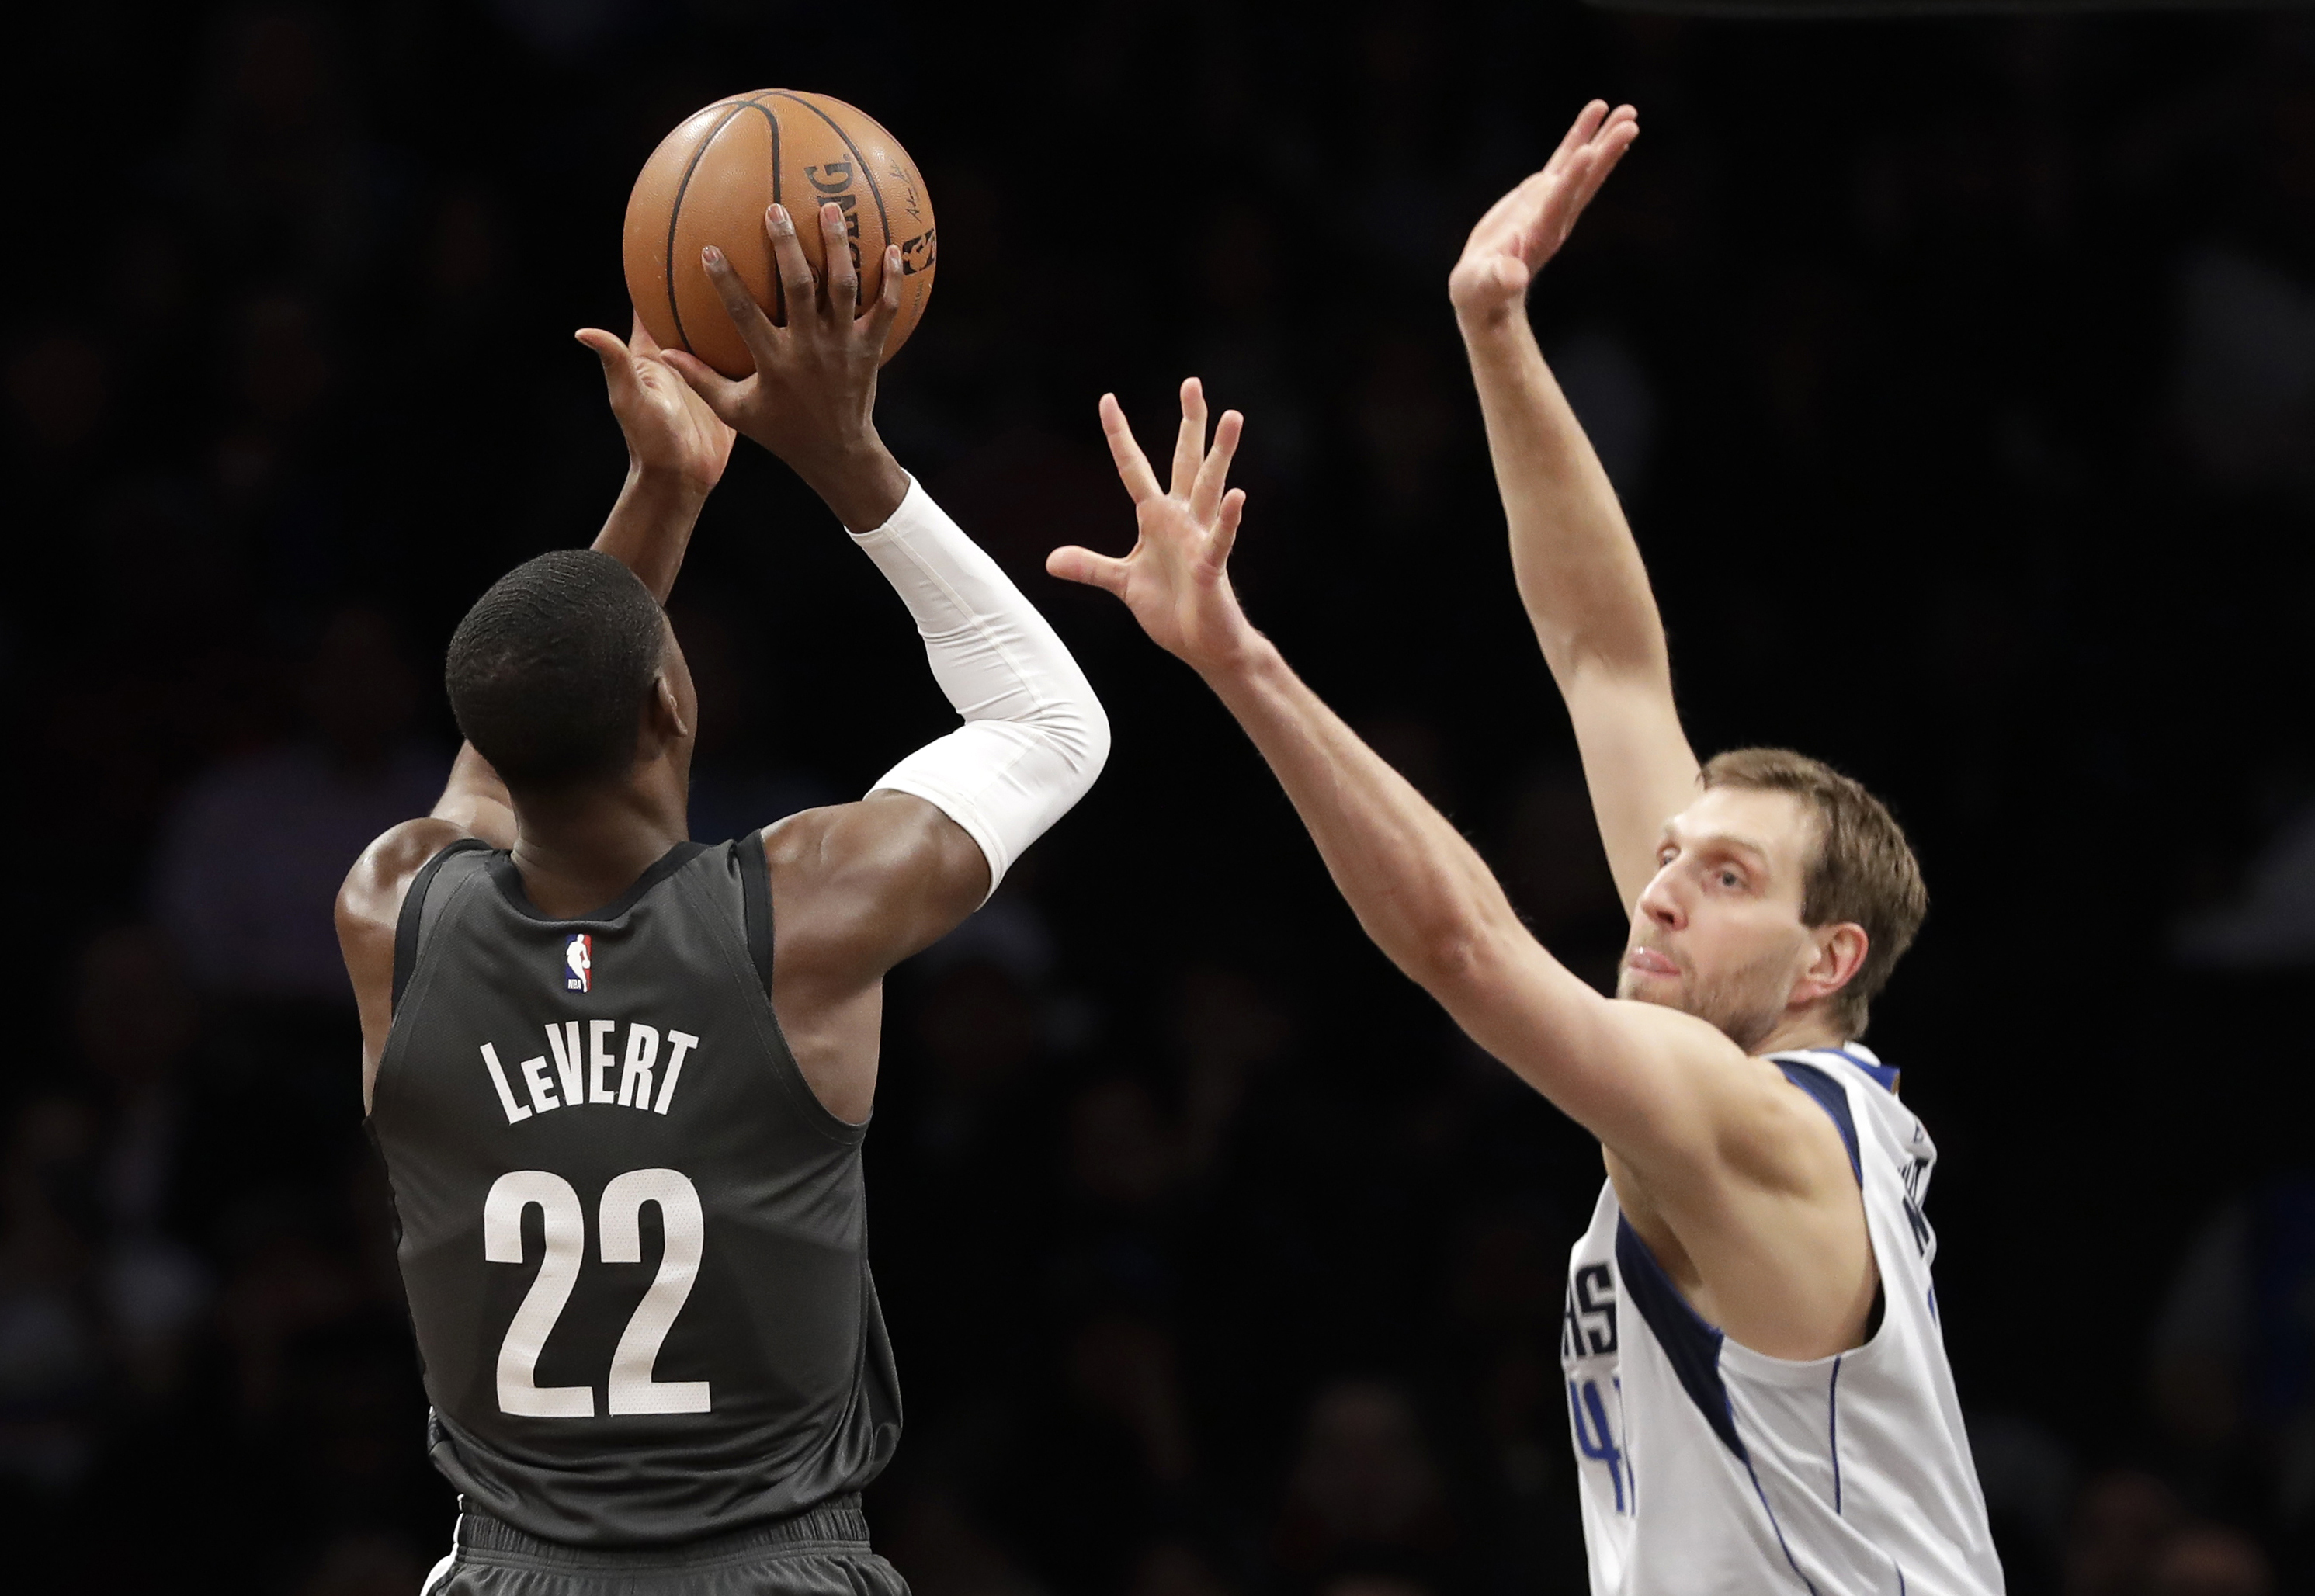 Dallas Mavericks forward Dirk Nowitzki right, defends Brooklyn Nets guard Caris LeVert (22) during the first half of Monday's game. AP Photos/Kathy Willens